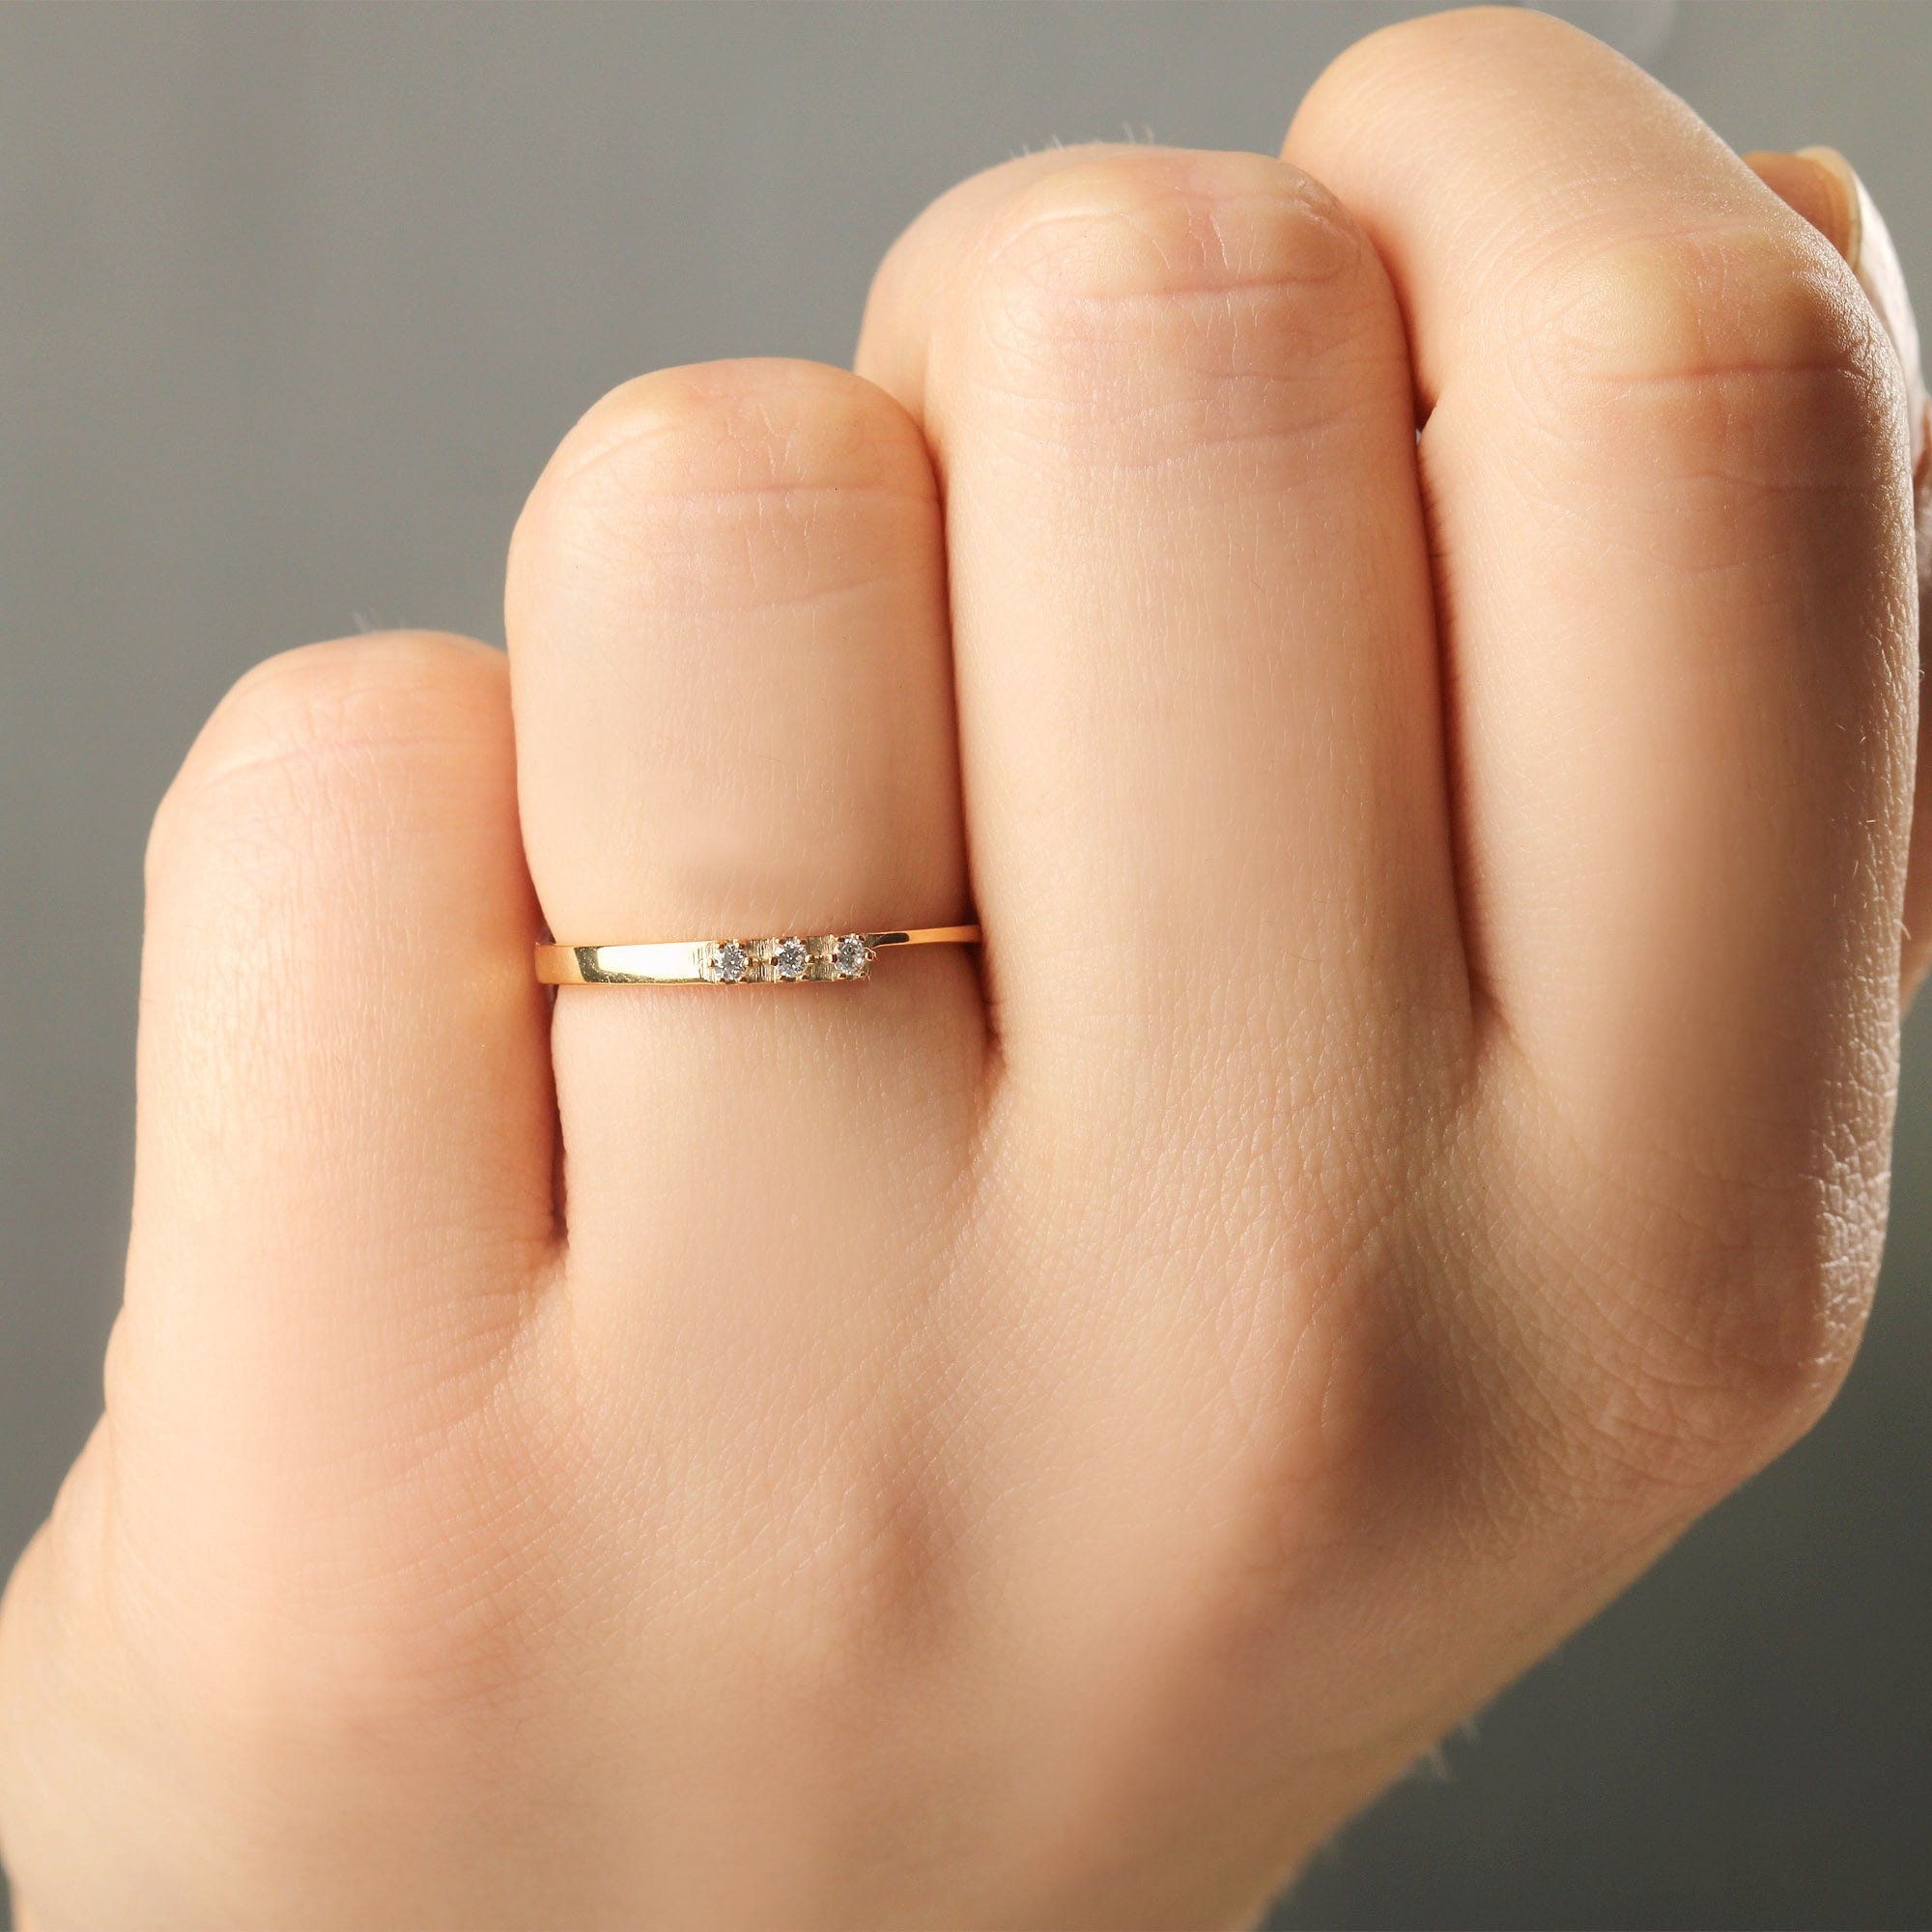 Buy Dainty Diamond Ring, Simple Gold Ring, Marquise Diamond Ring,  Minimalist Ring, Gold Ring, Delicate Ring, Thin Ring, 14K Gold Stacking Ring  Online in India - Etsy